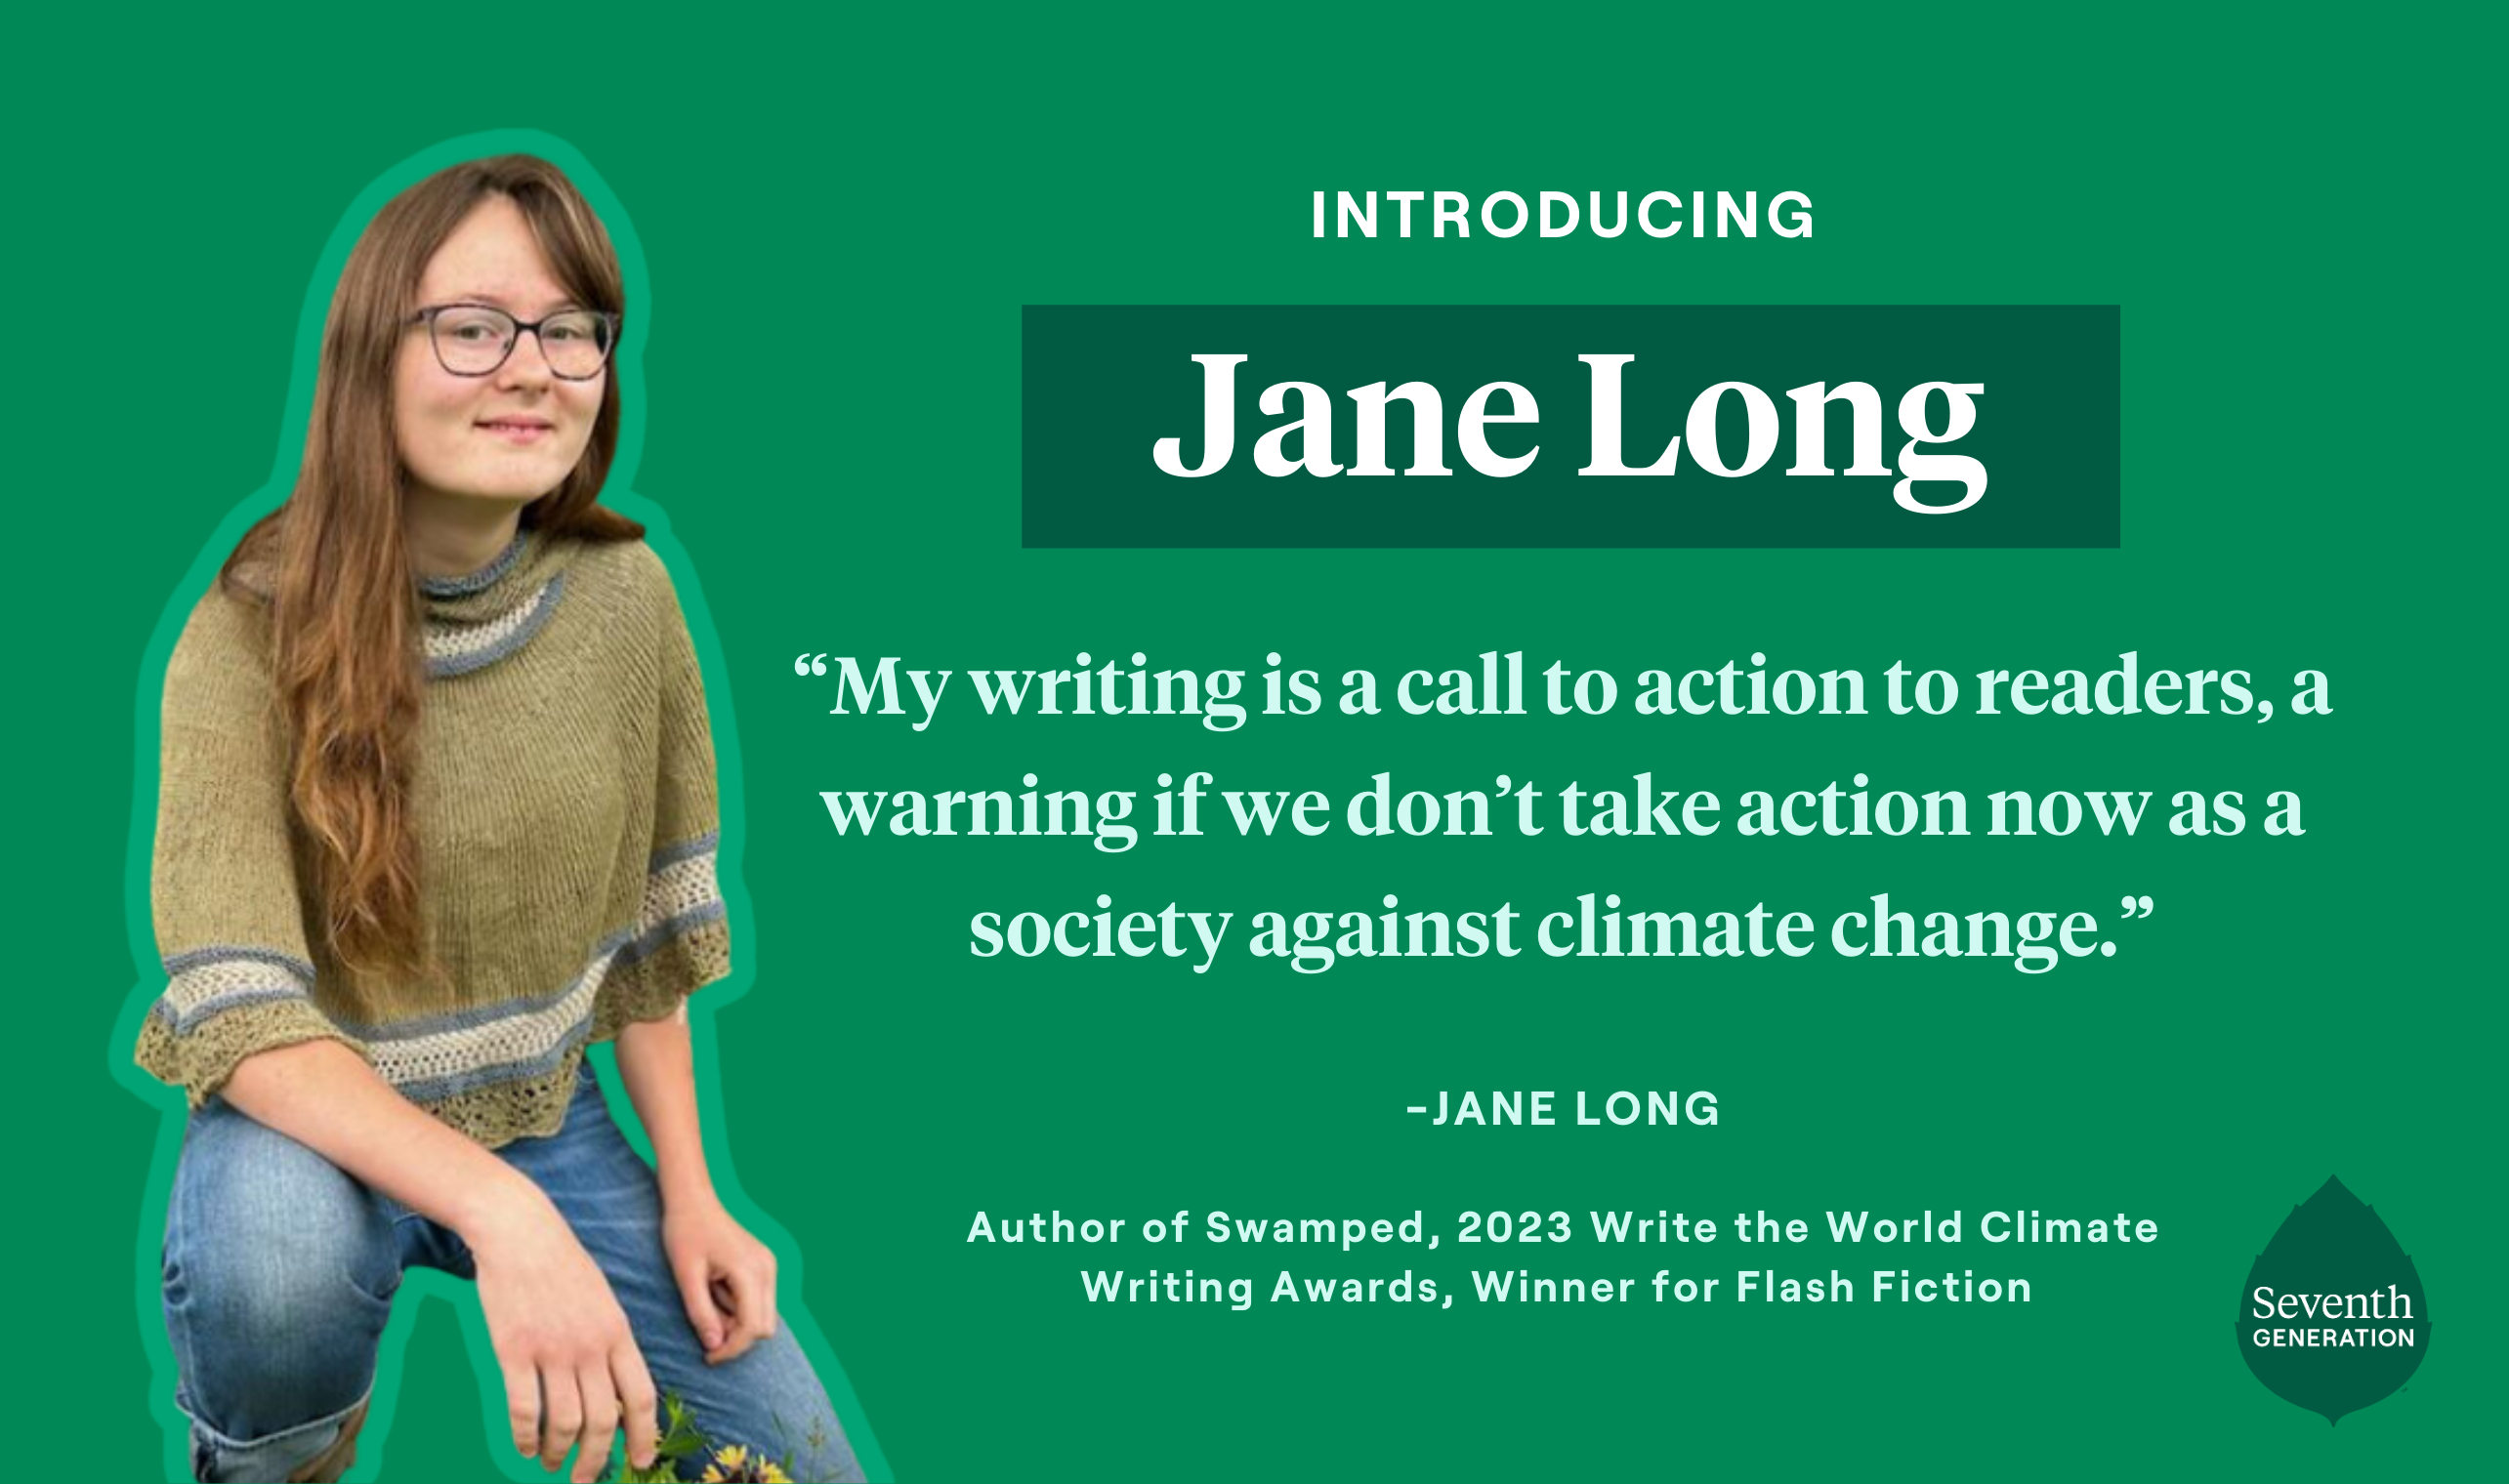 Jane Long - "My writing is a call to Action to readers, a warning if we don't take action now as a society against climate change"